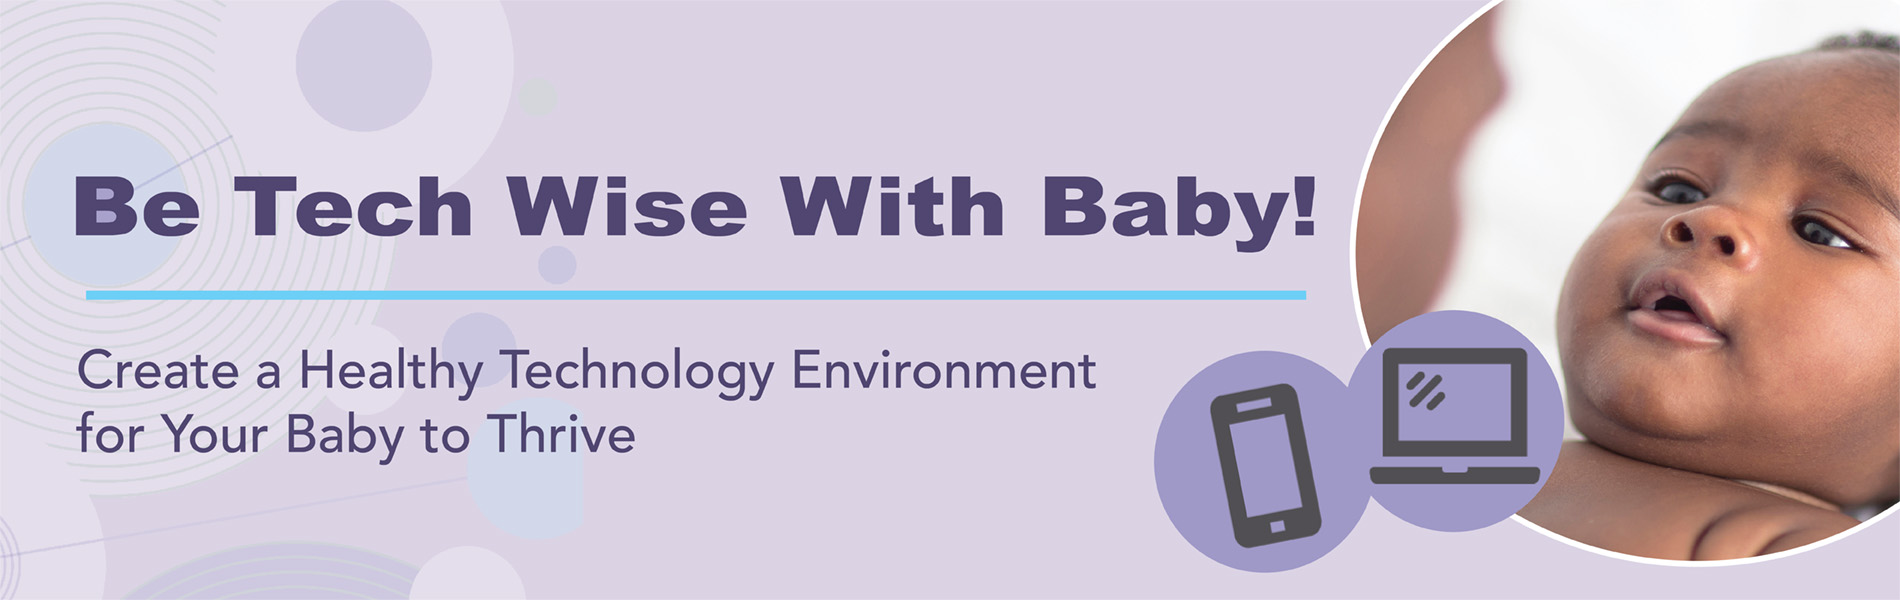 New Guide for Prospective and New Parents Helps Them Be Tech Wise With Baby!